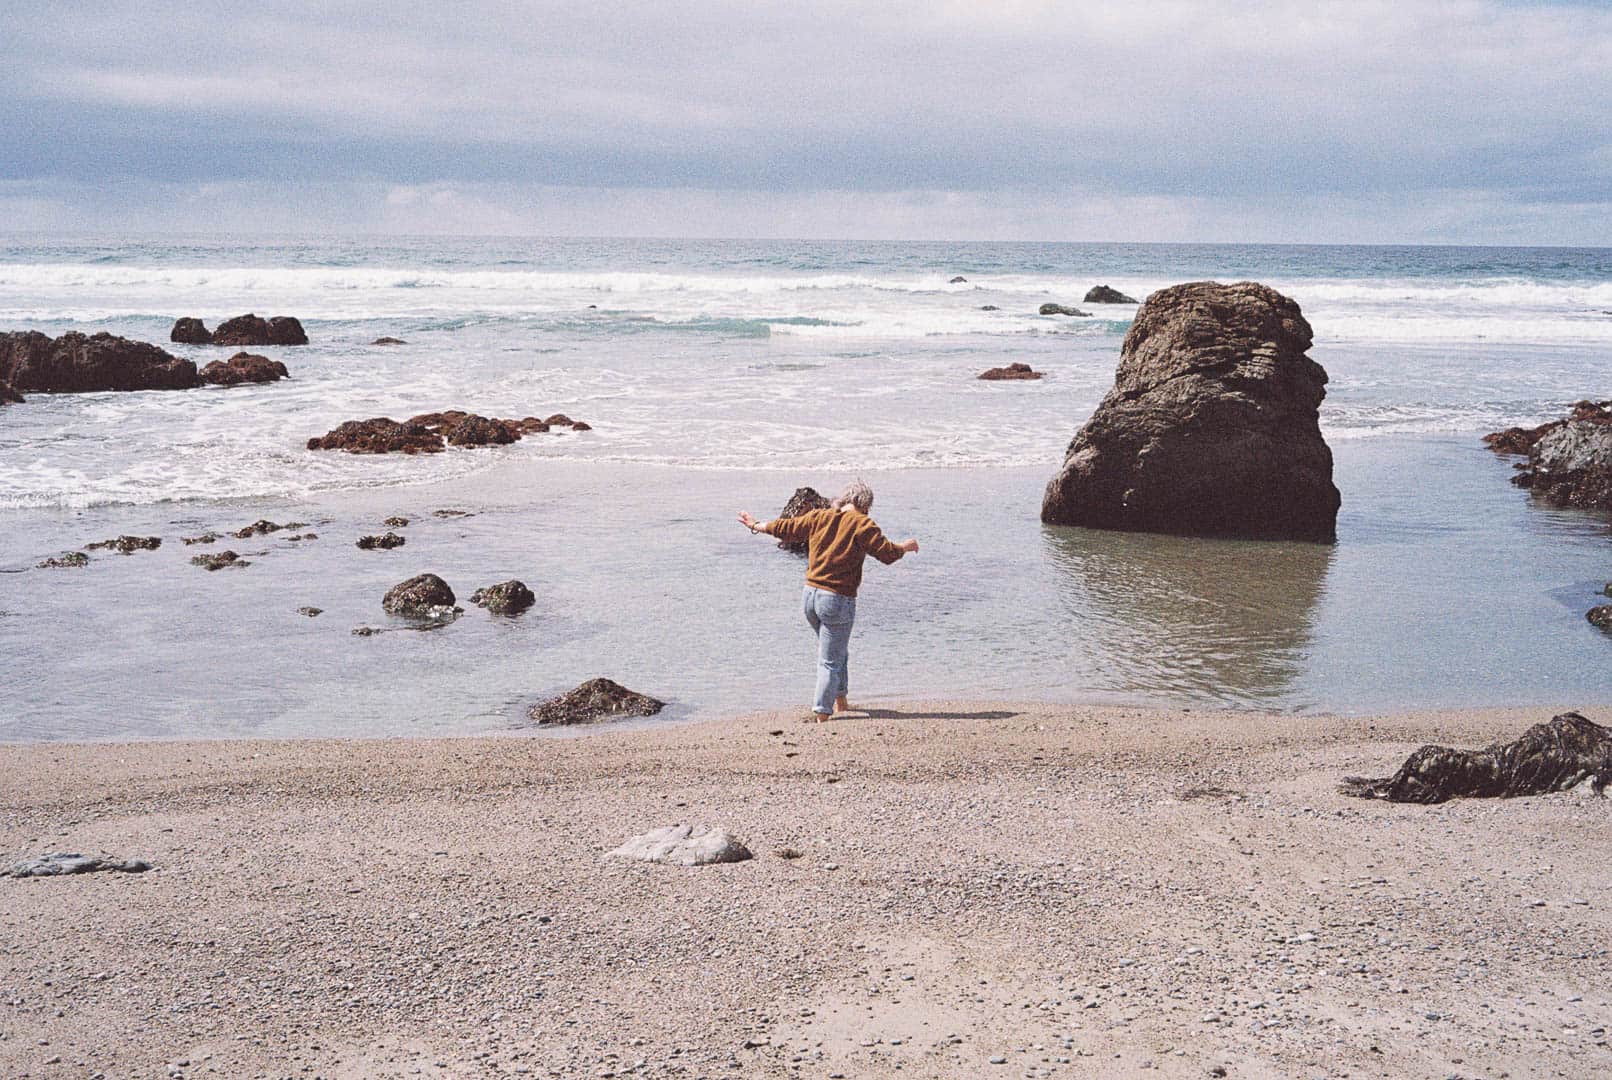 A woman walking into the water of a rocky beach